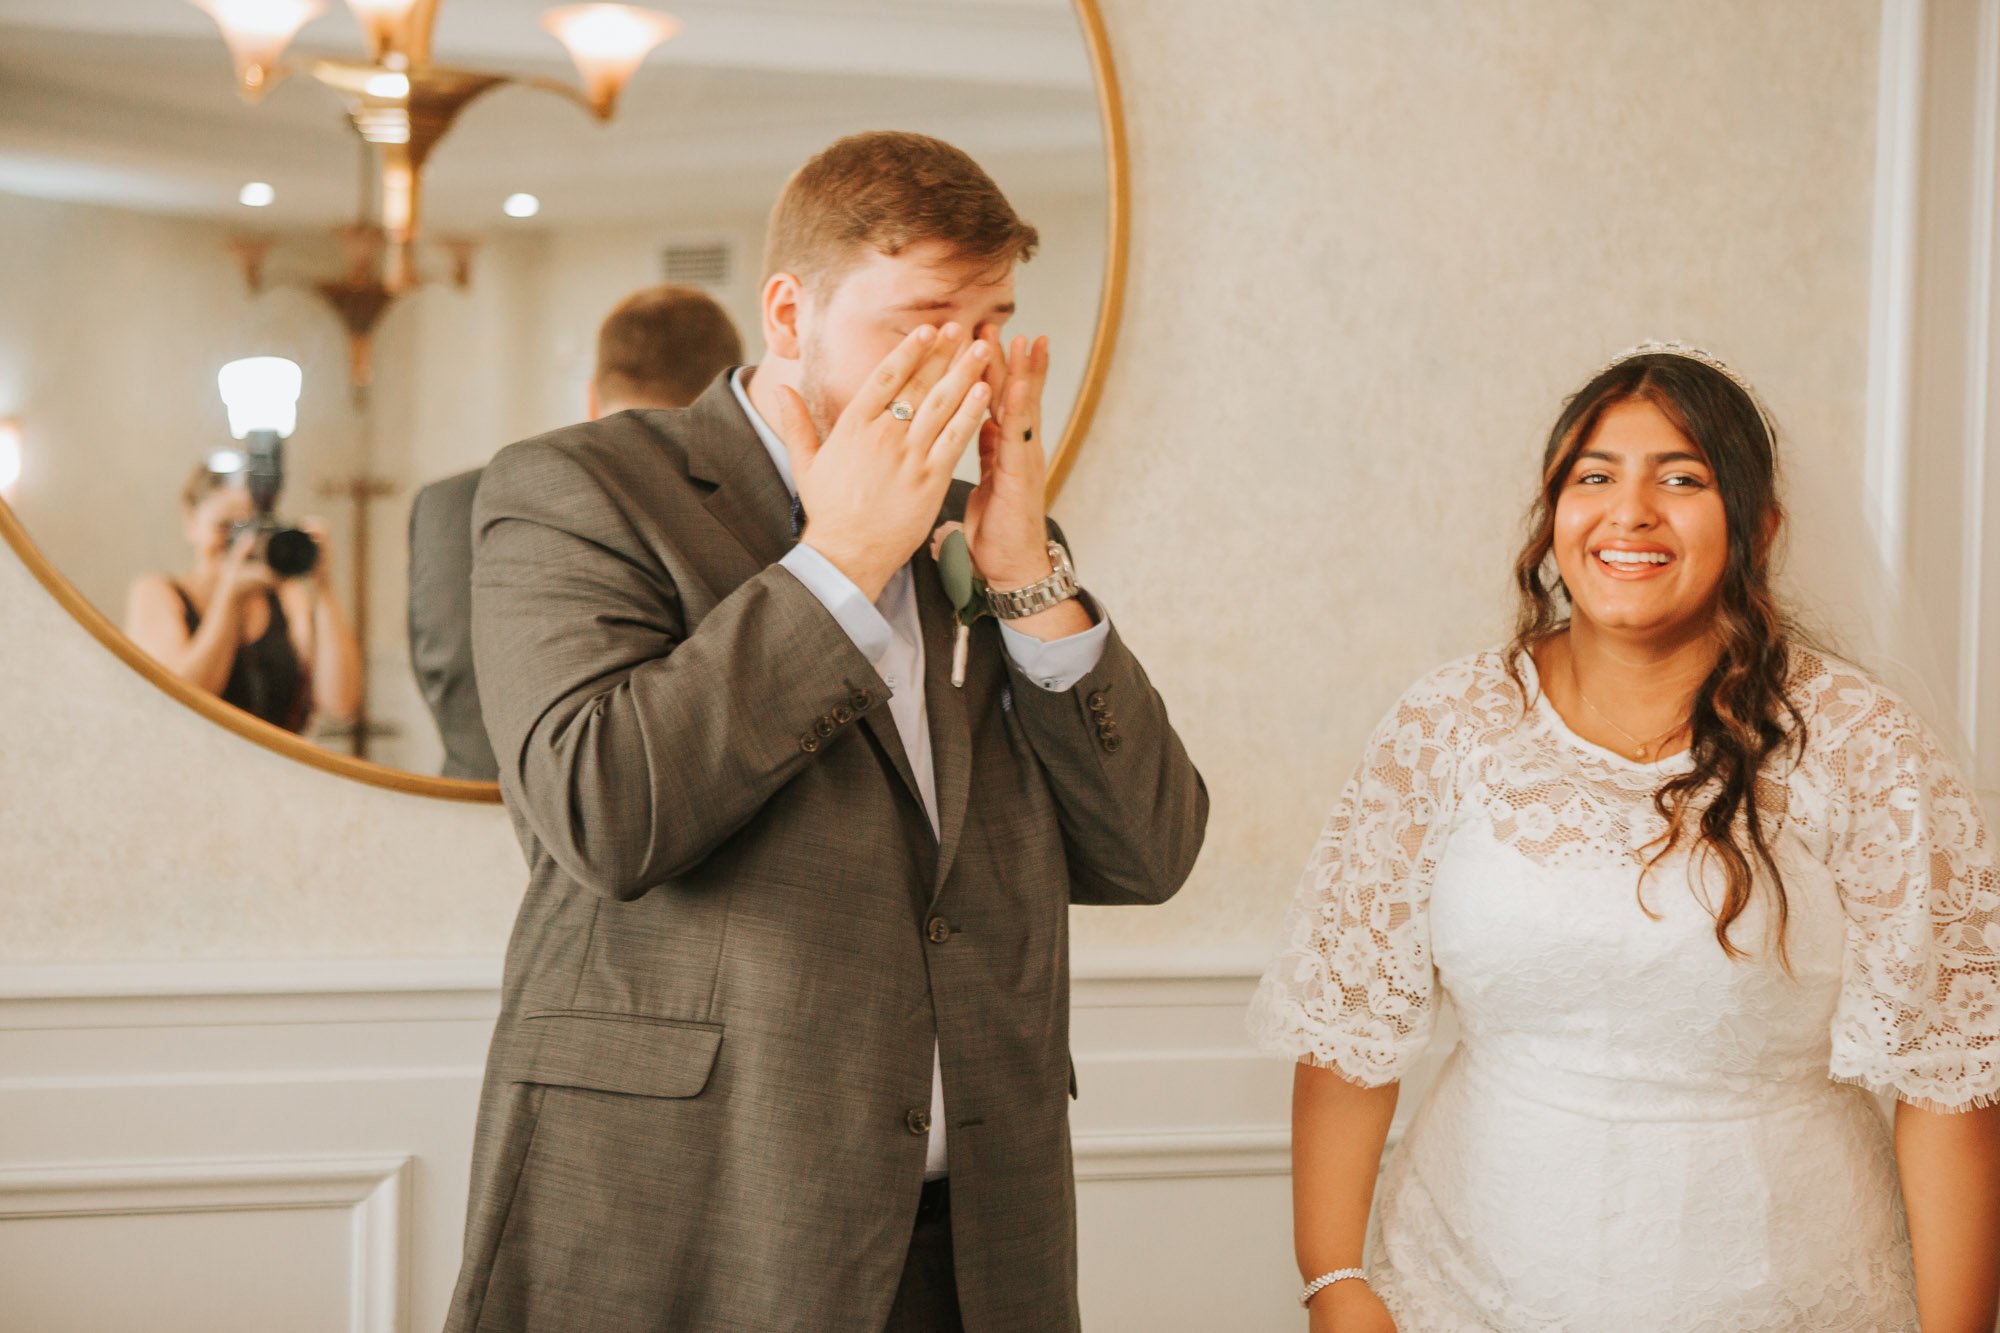  An emotional groom wells up after marrying his bride, while the wedding photographer can be seen capturing the moment! 